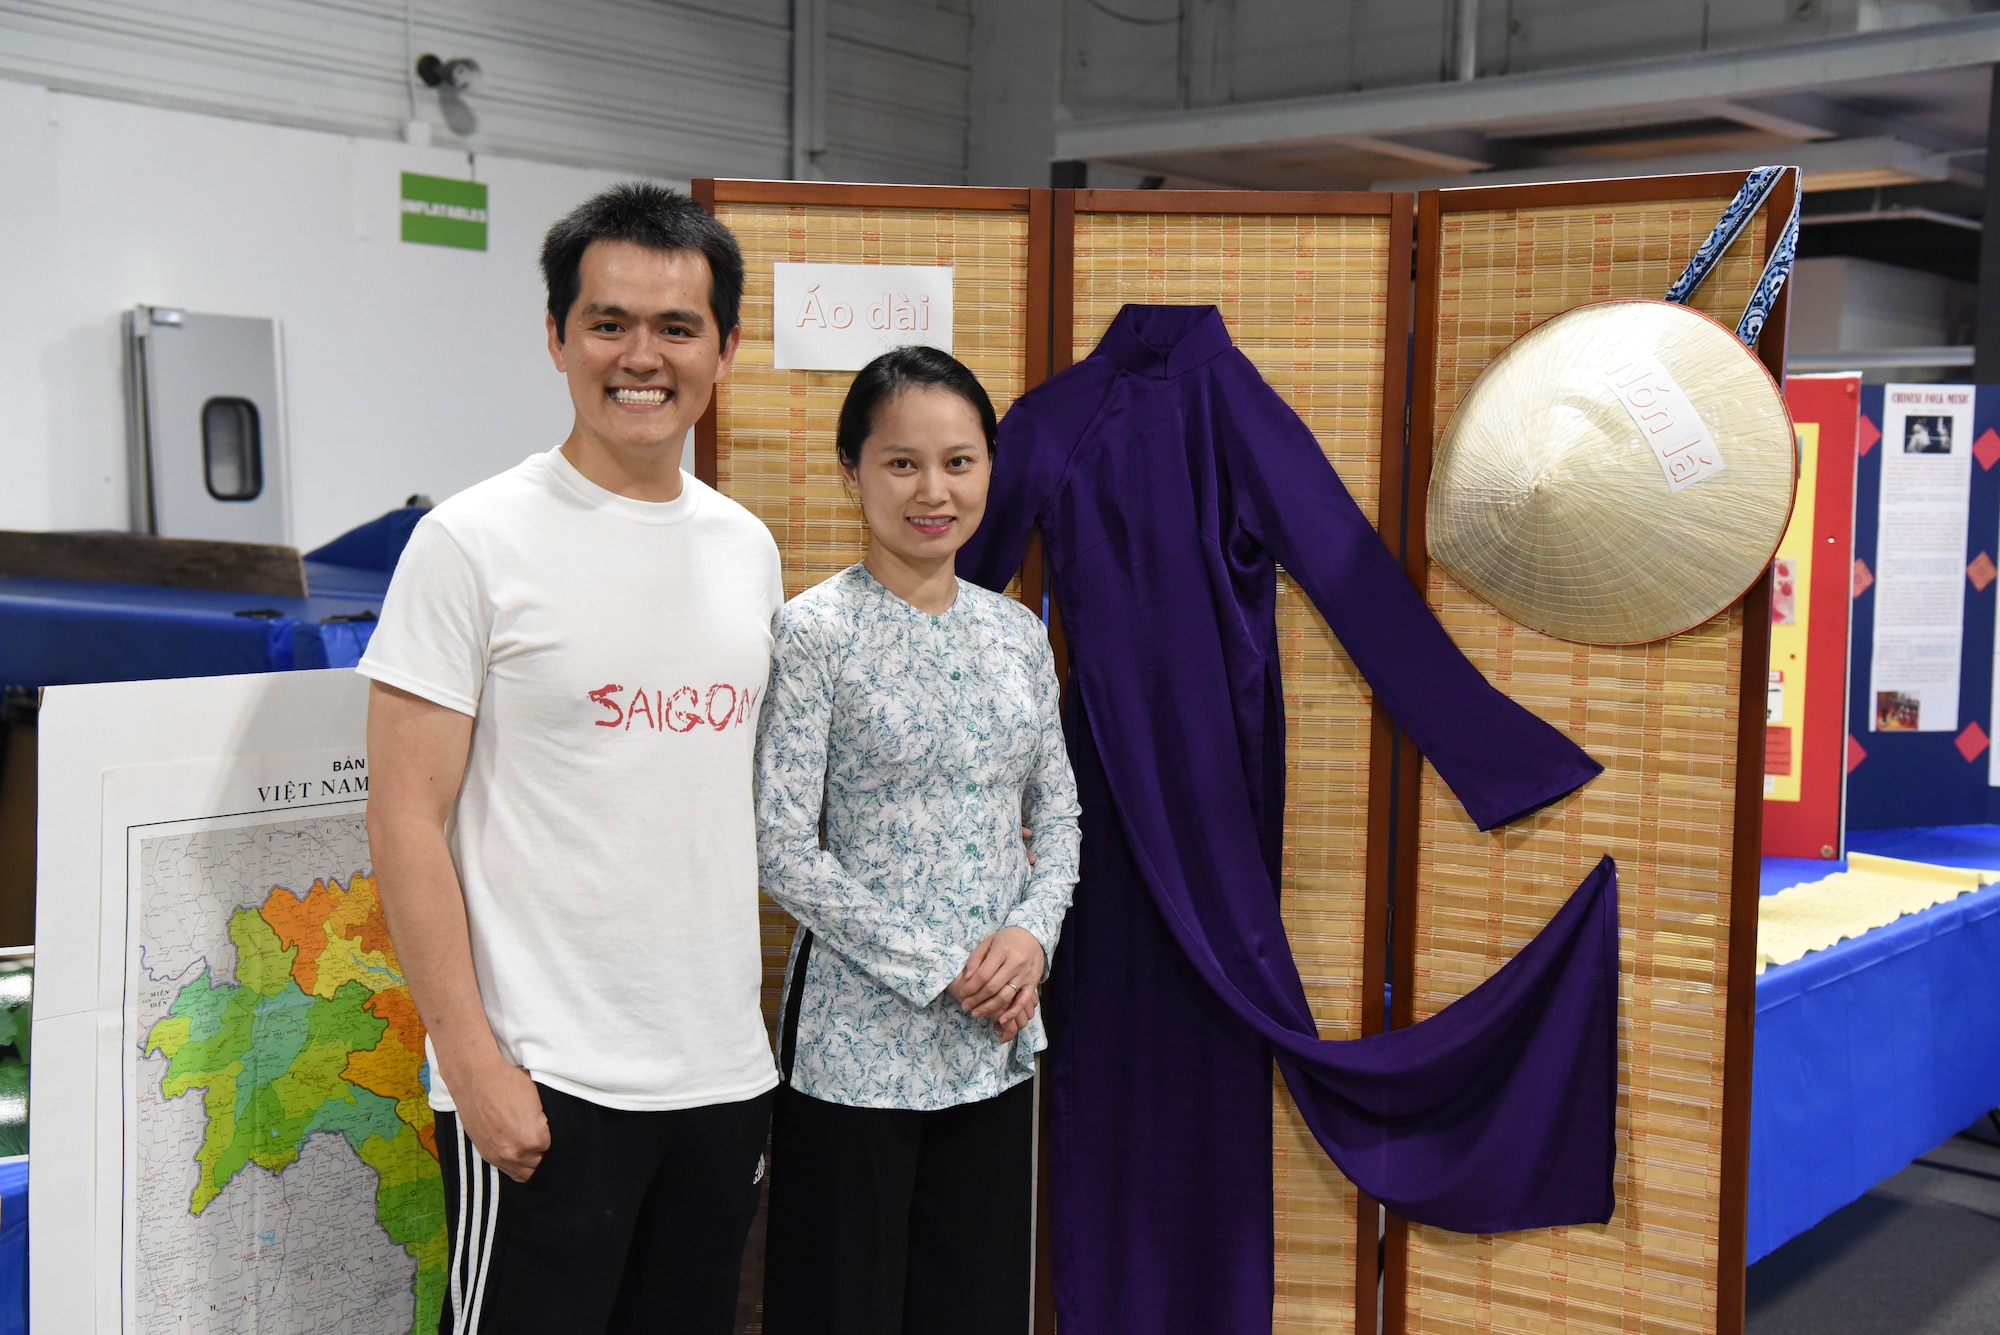 Airman 1st Class Luan Tong, a 319th Comptroller Squadron financial operations technician, and his wife, Linh Le, pose for a photo June 20, 2018, at Grand Forks Air Force Base, North Dakota. Tong said his booth was based on Vietnam culture, where he showed base residents clothing styles, tea sets and a food dish from his native country. (U.S. Air Force photo by Airman 1st Class Melody Wolff)